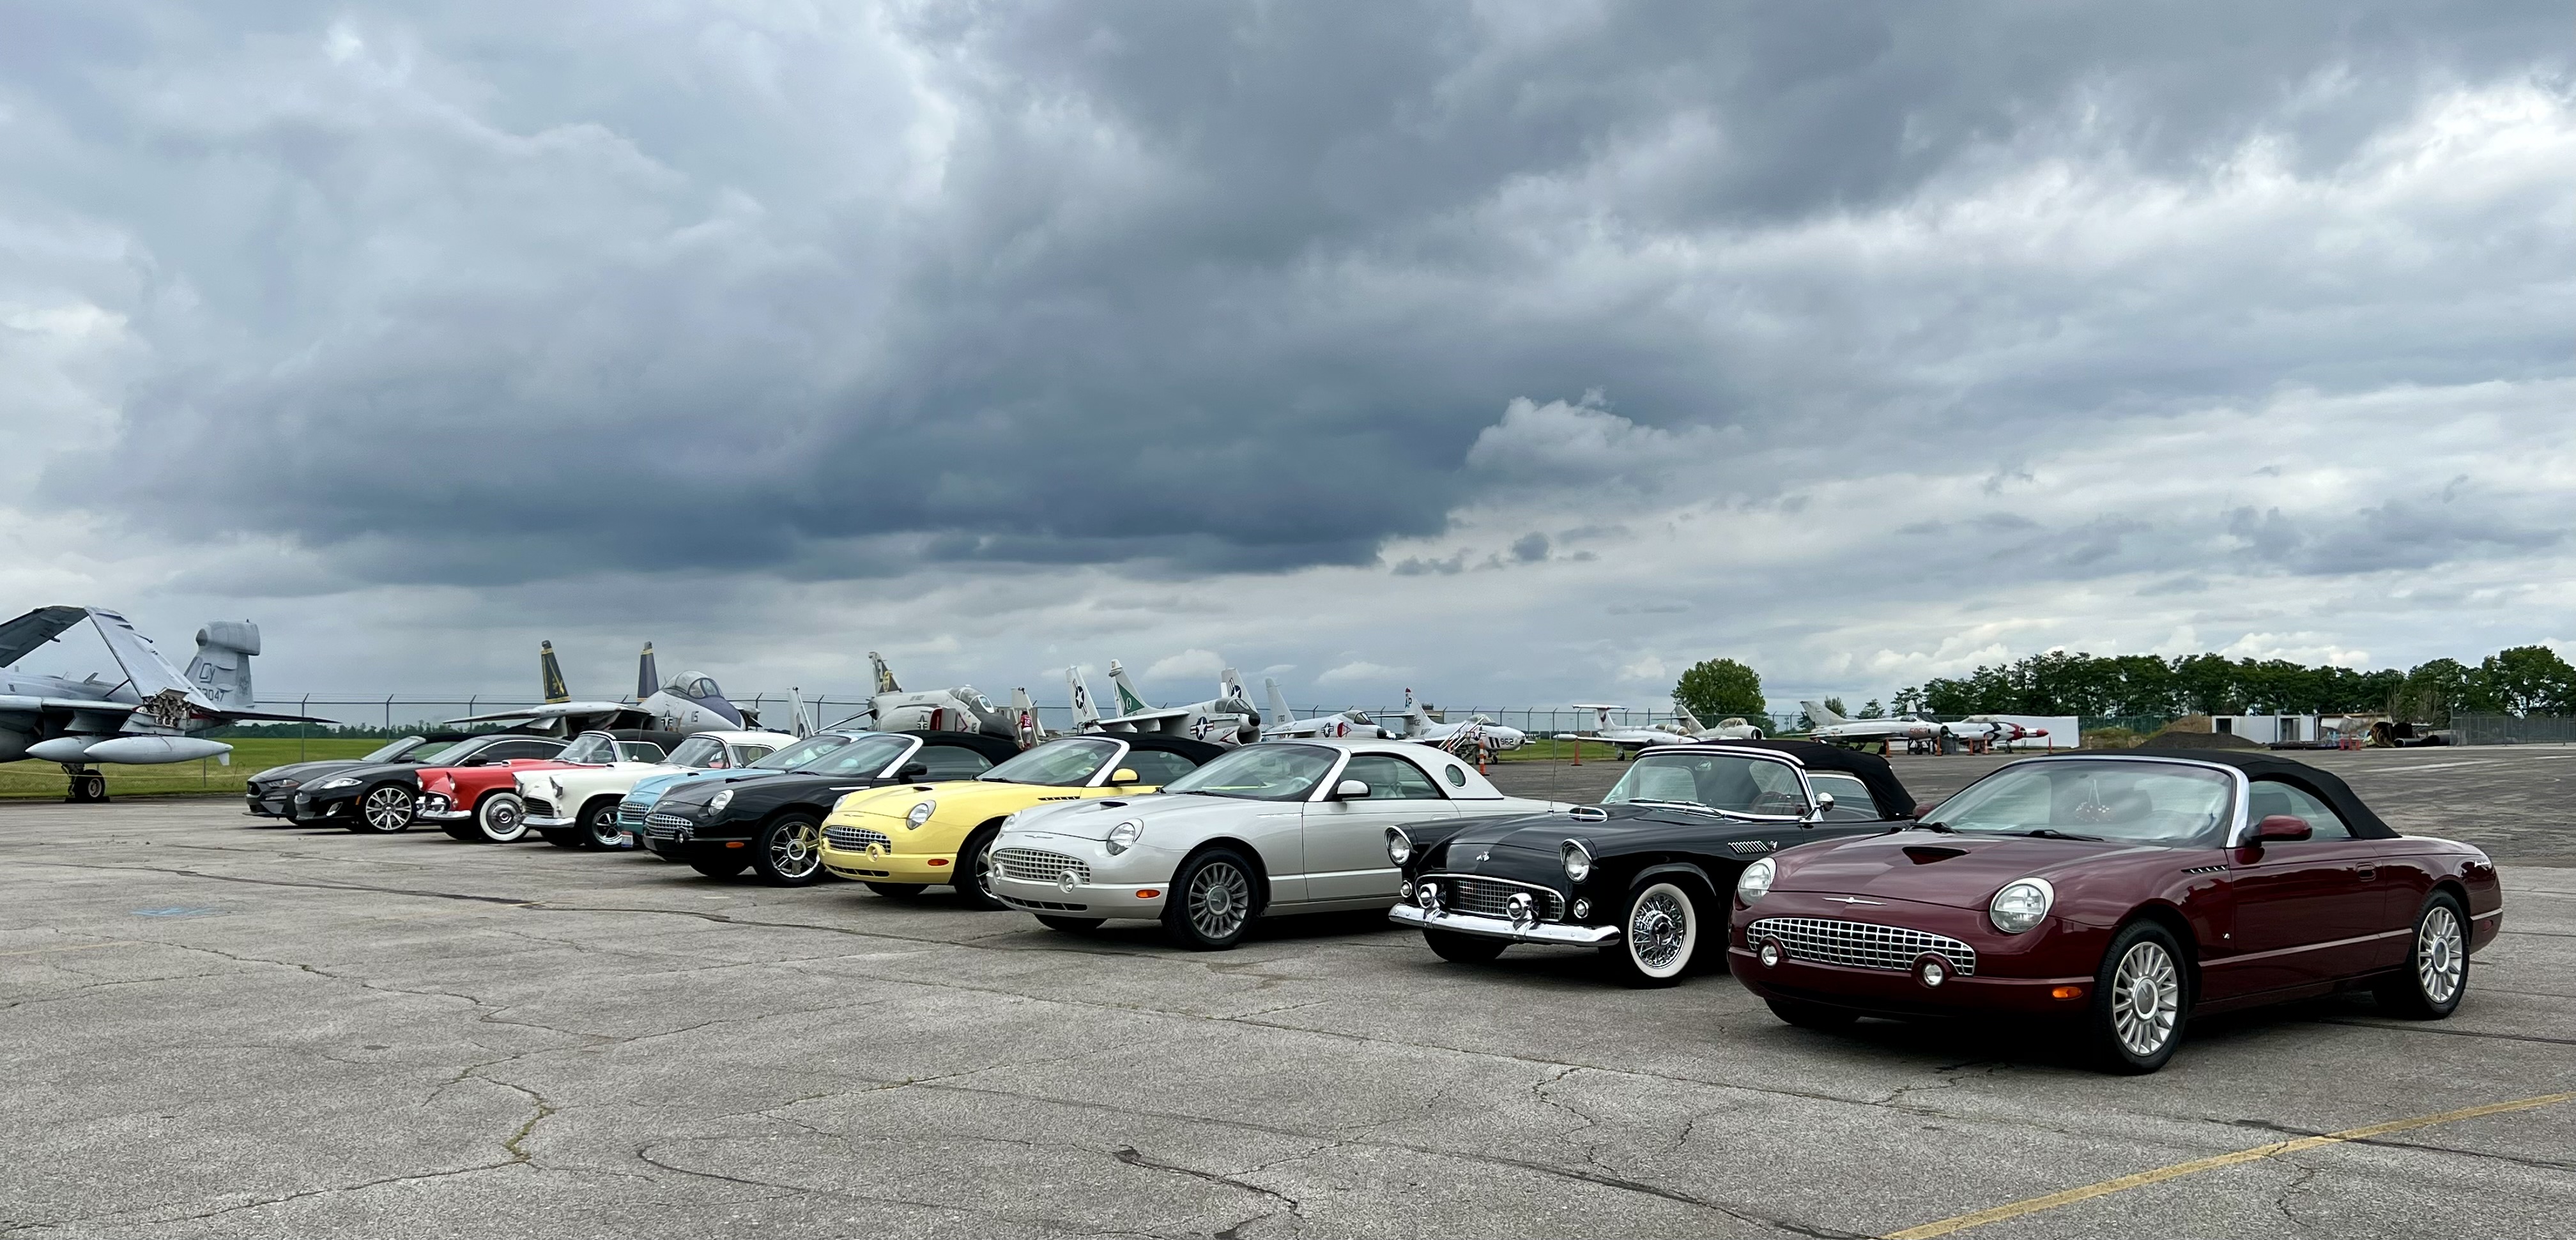 The Classic Thunderbird Club of Northern Ohio at the MAPS Air Museum